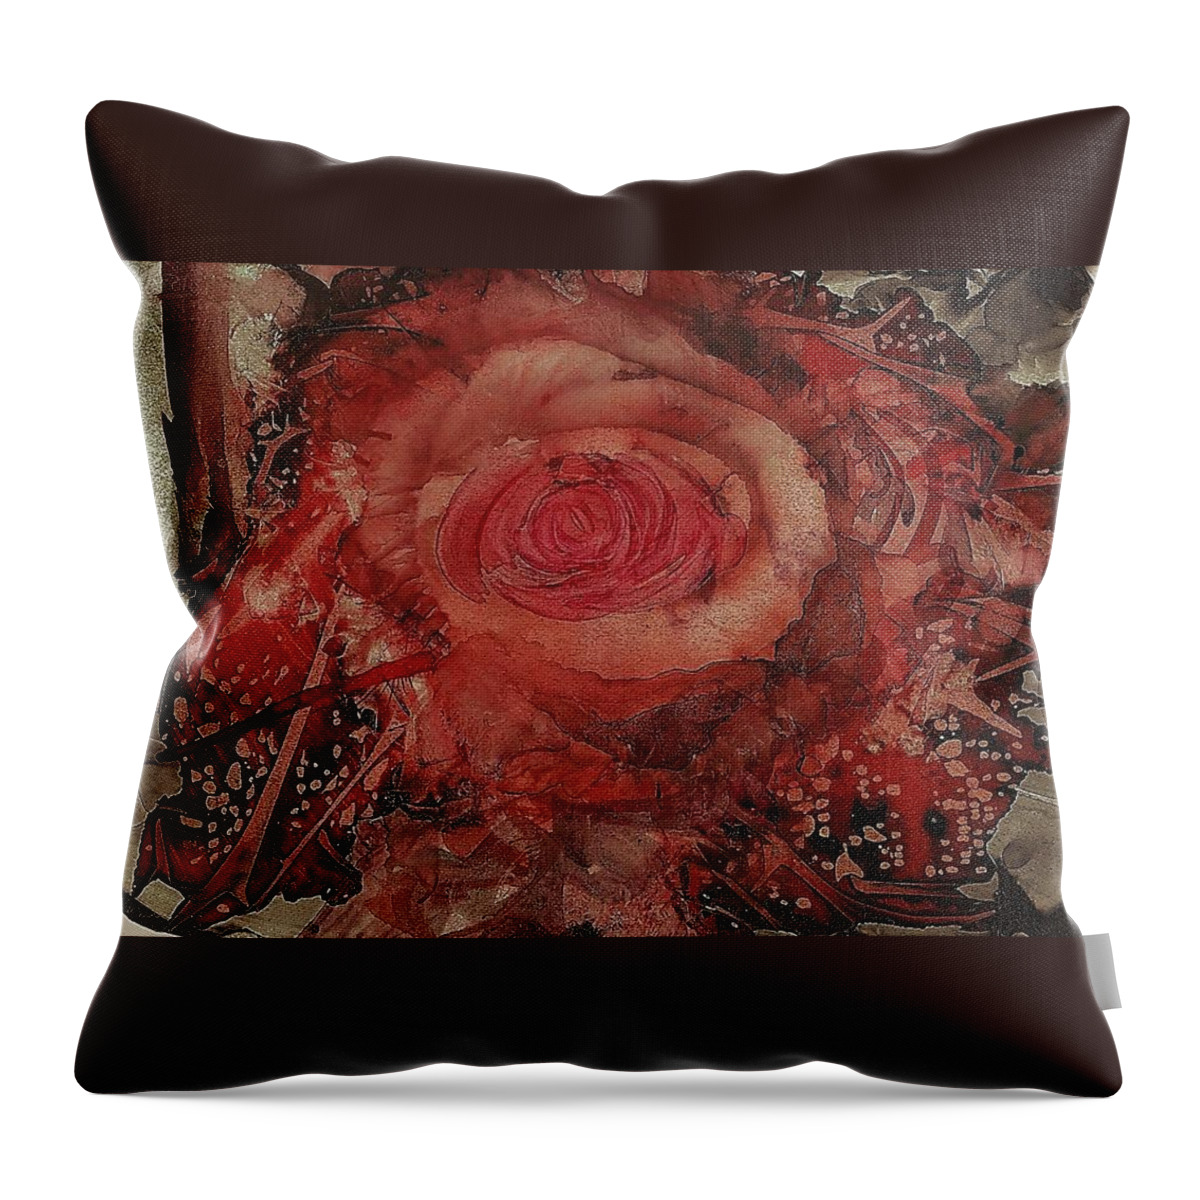 Rose Throw Pillow featuring the painting Mountain Rose by Angela Marinari